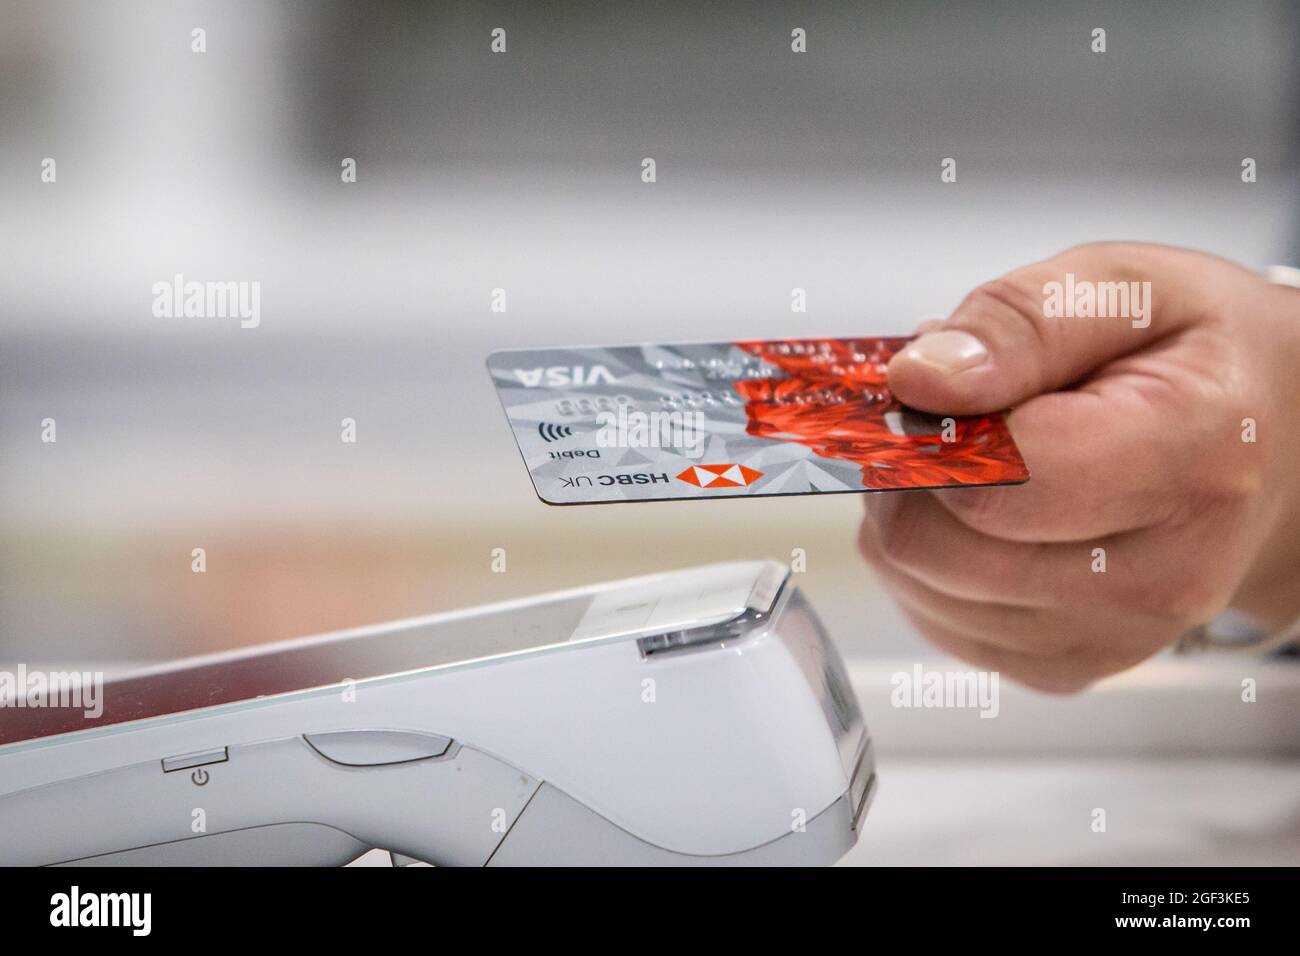 Close up of a bank debit card being used to purchase using contactless. Stock Photo